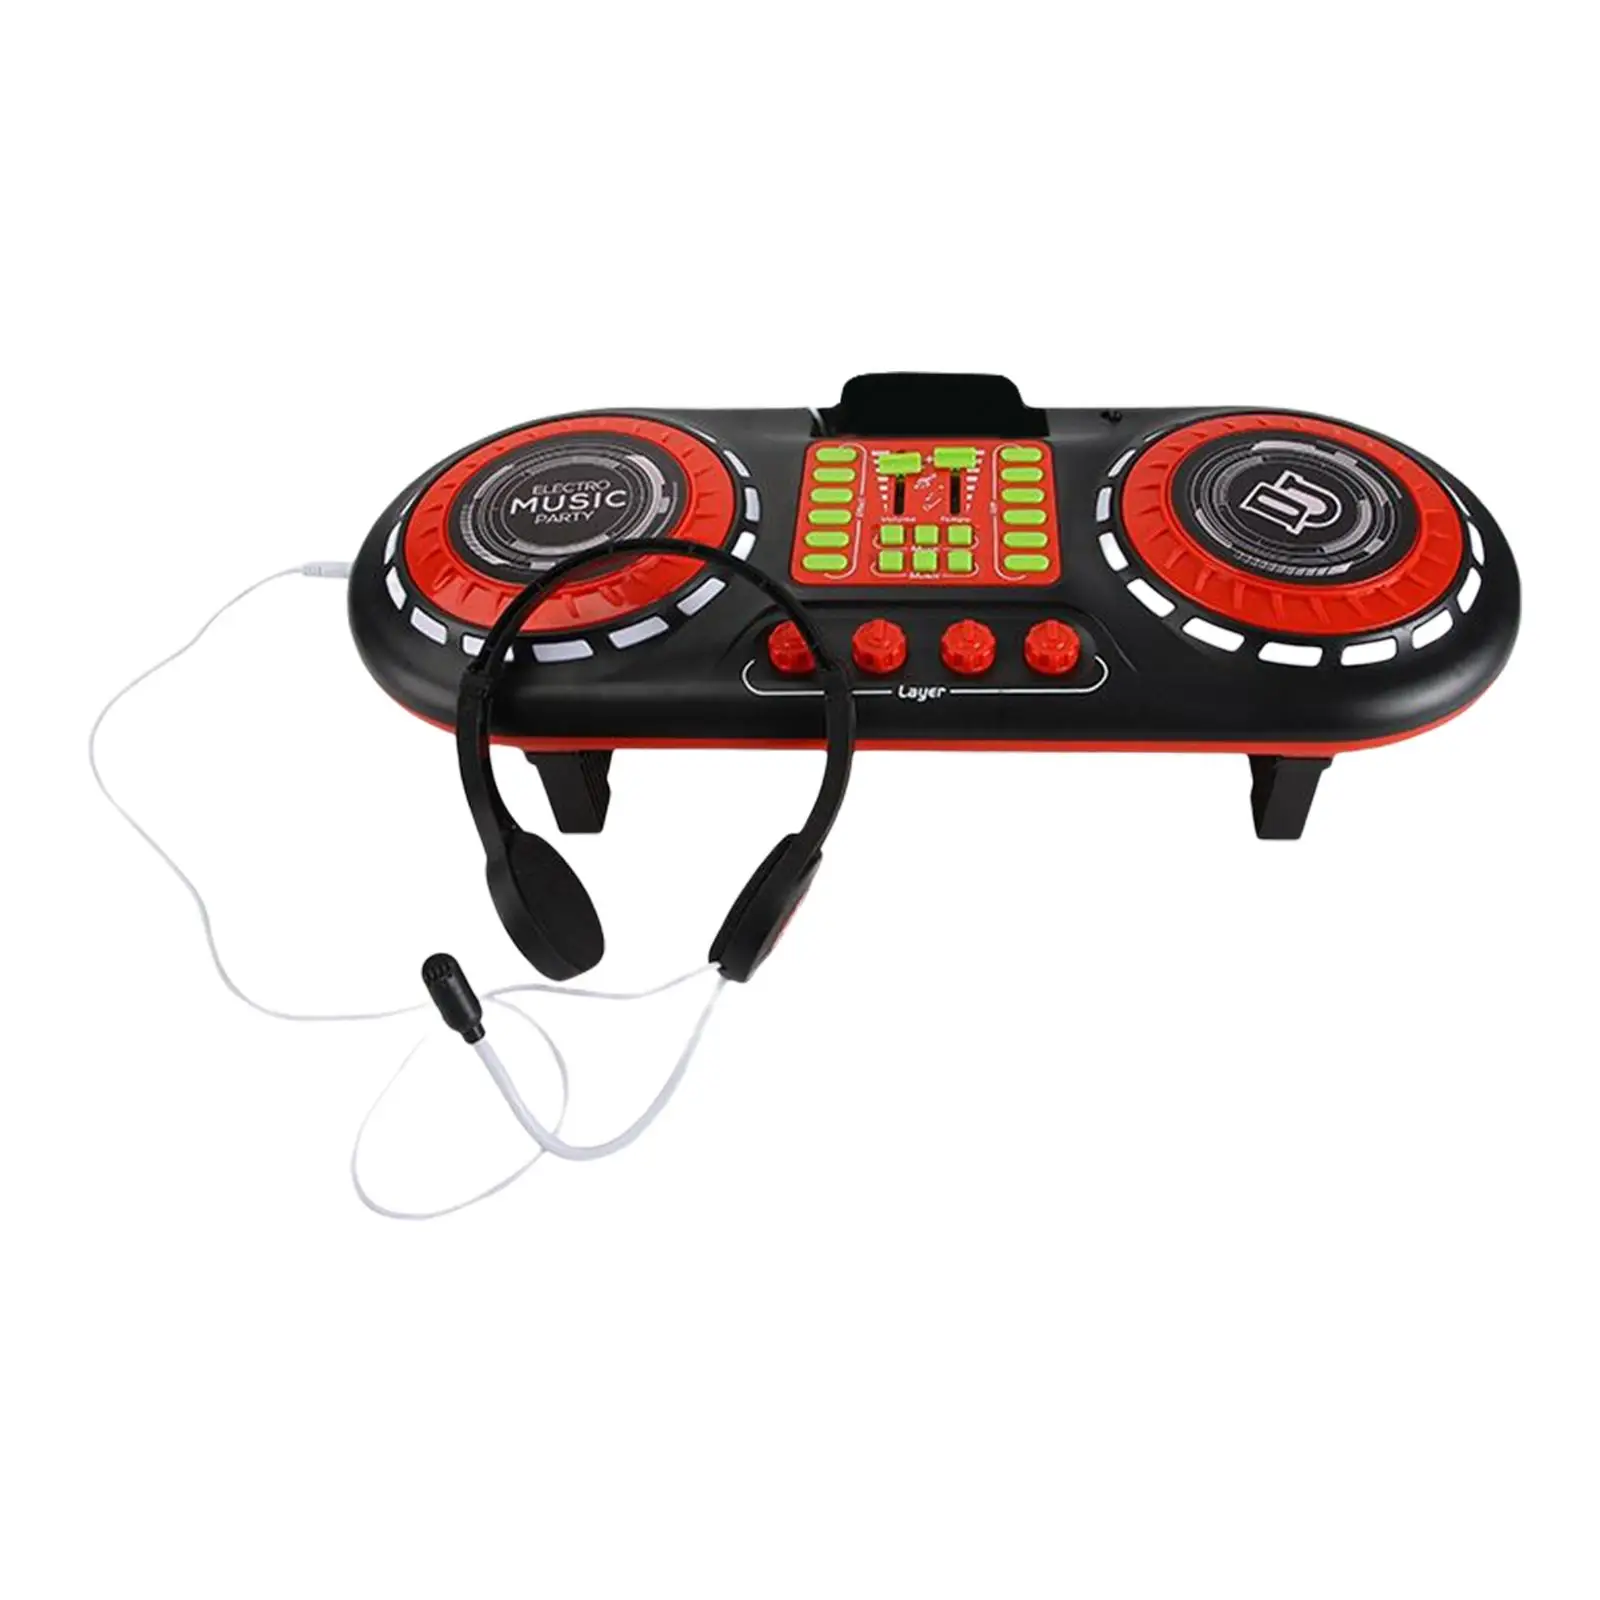 Kids Toys DJ Mixer DJ Turntable Music Mixer Gift Musical Toys for Children 3+ Years Boys